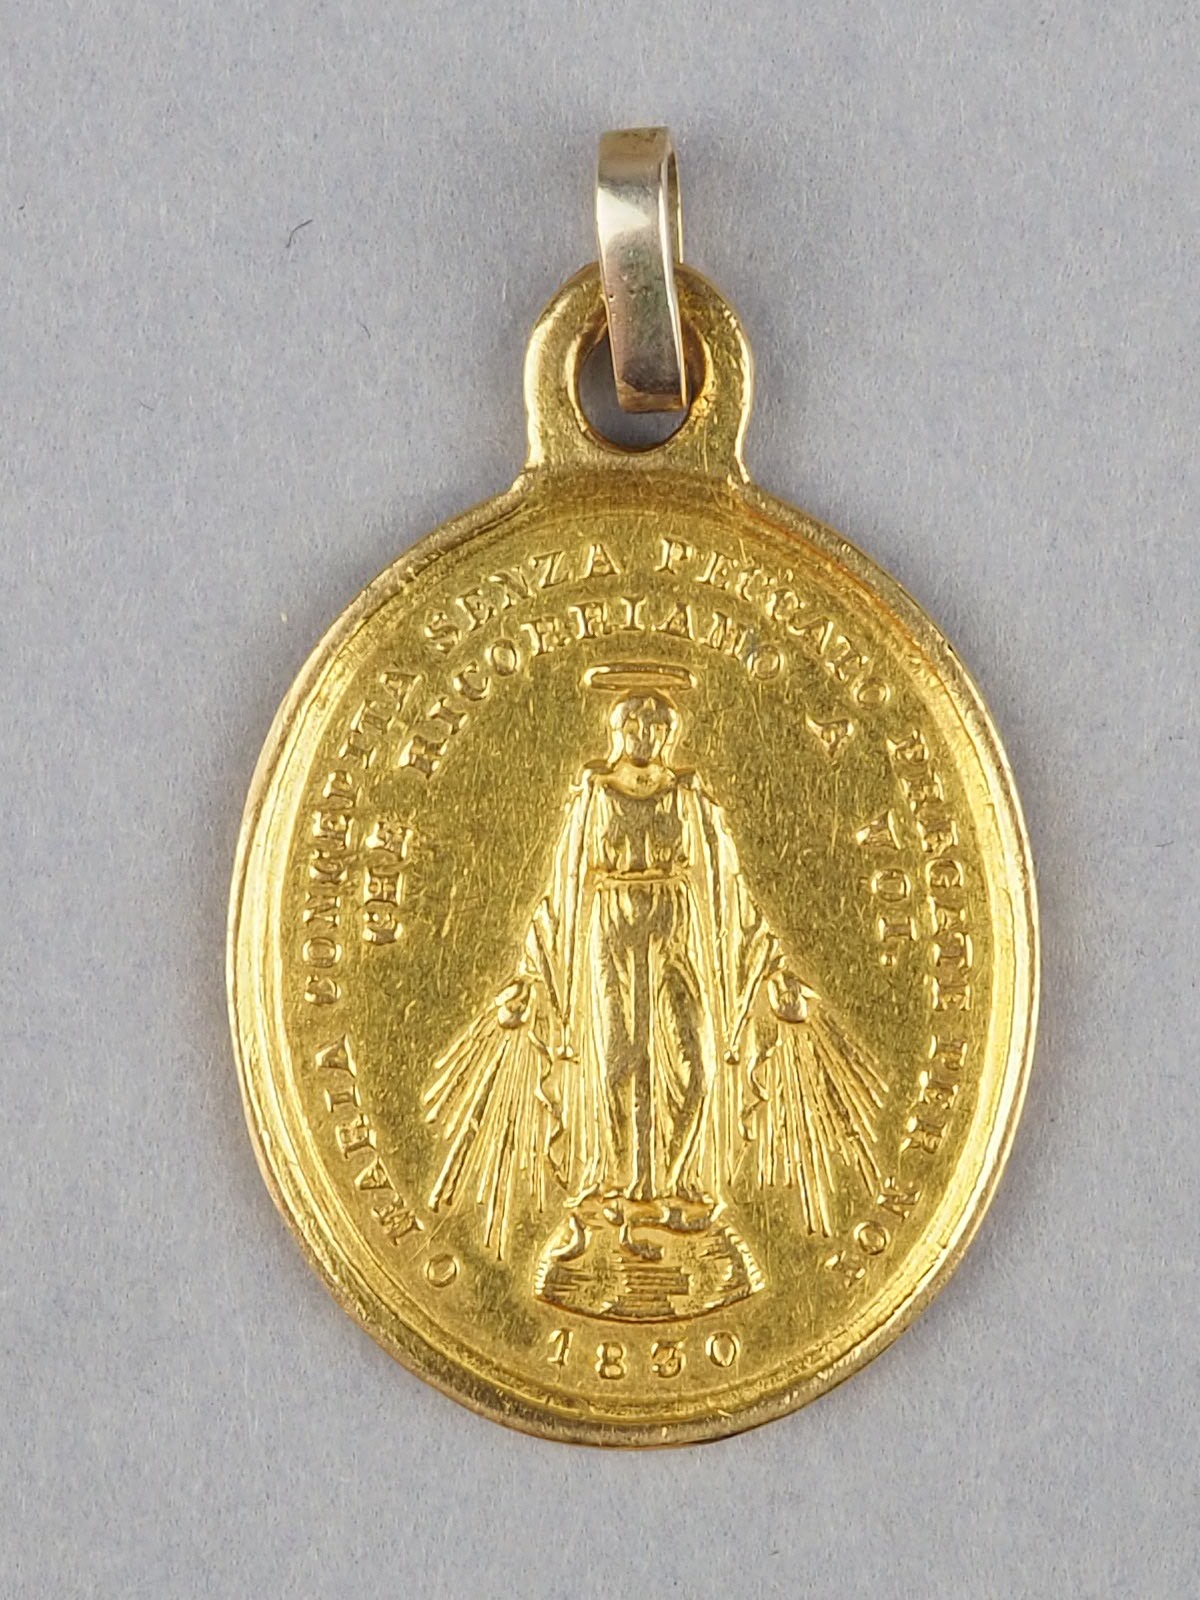 Miraculous medal, 18kt gold, Italy circa 1858 - Pope Pius IX. - Image 2 of 2